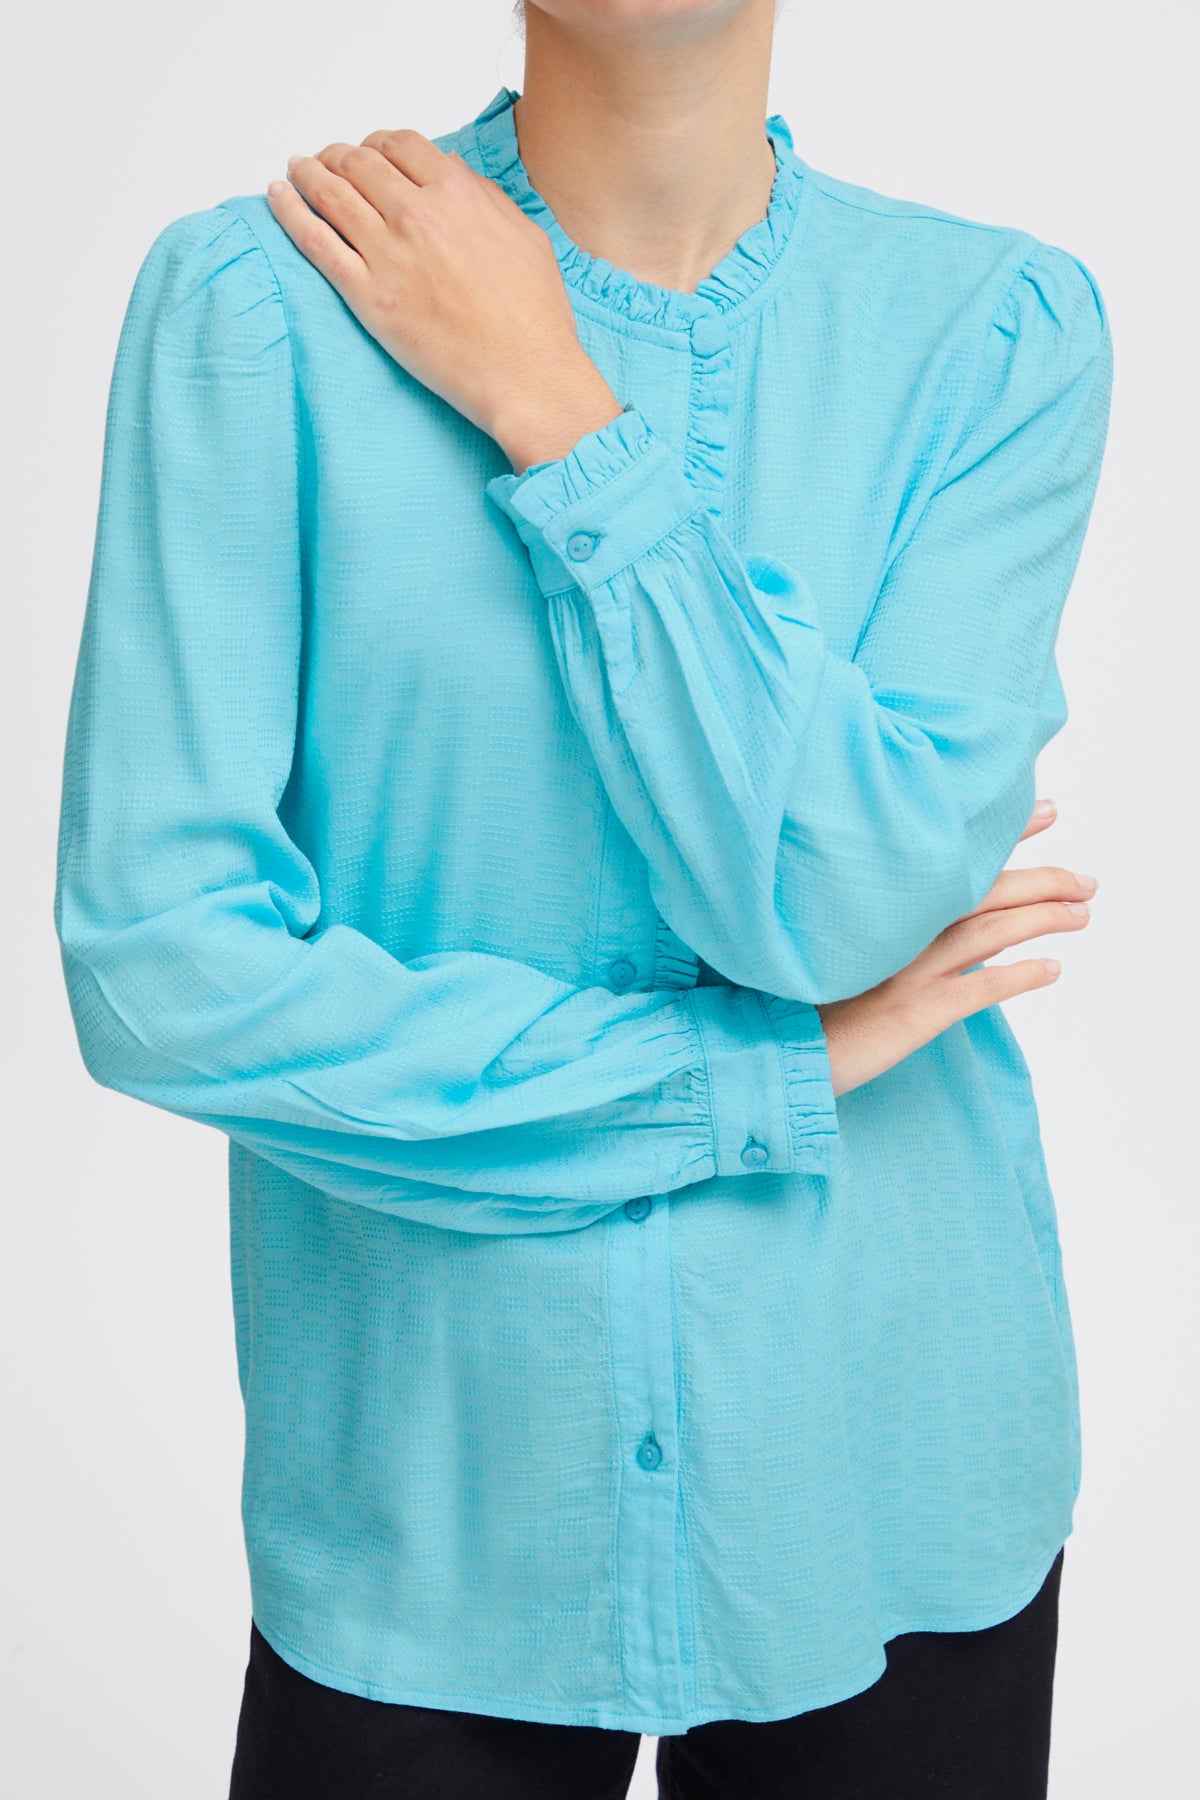 Gemano Blouse in Blue Grotto